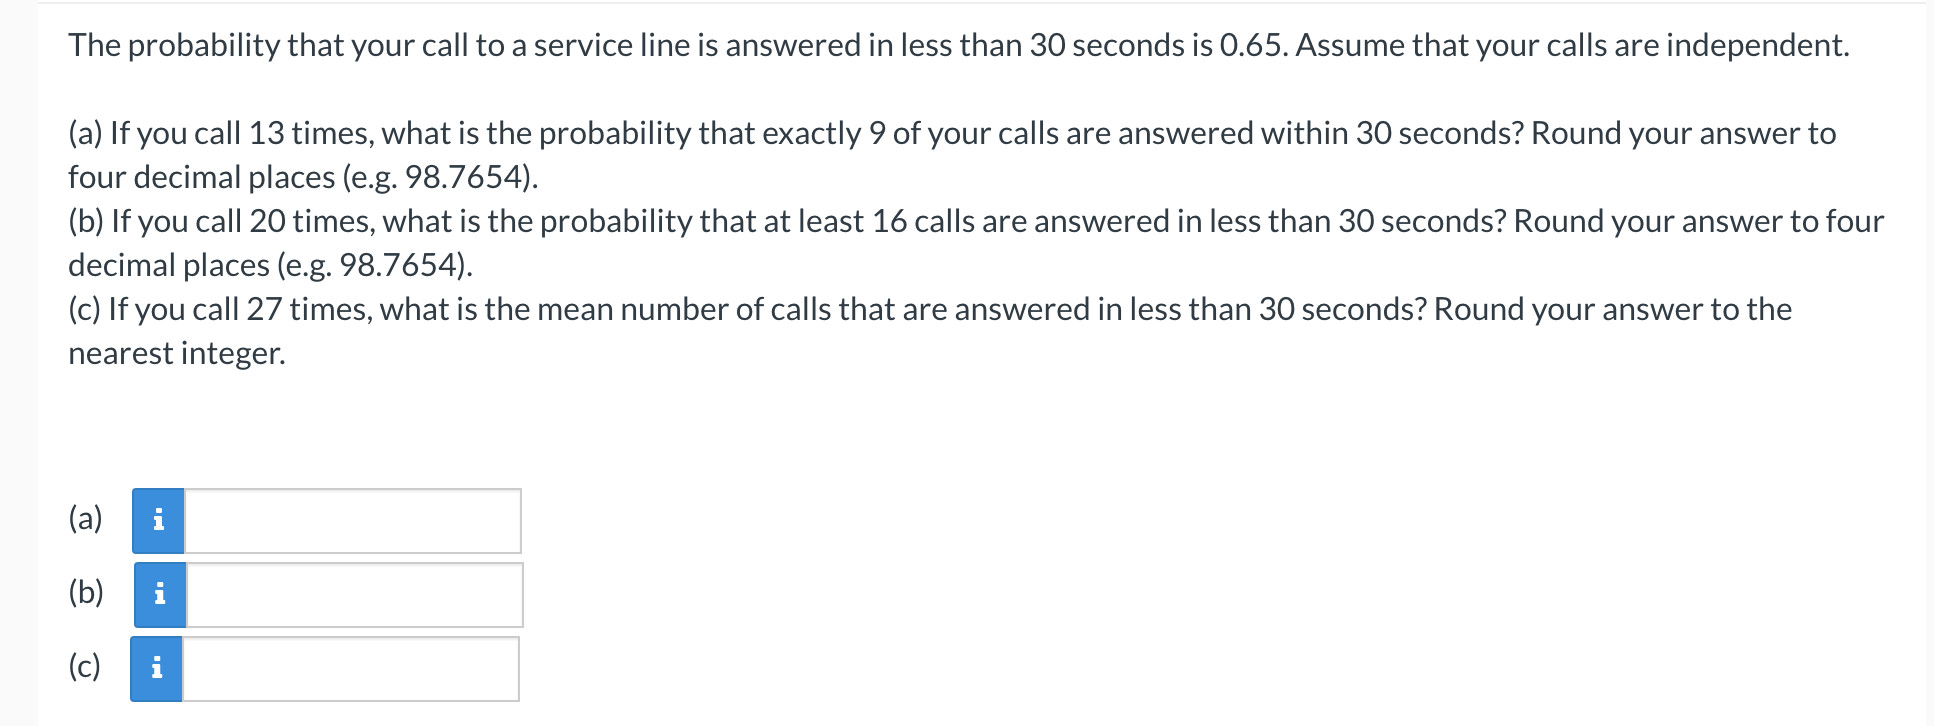 The probability that your call to a service line is answered in less than 30 seconds is 0.65. Assume that your calls are independent.
(a) If you call 13 times, what is the probability that exactly 9 of your calls are answered within 30 seconds? Round your answer to
four decimal places (e.g. 98.7654).
(b) If you call 20 times, what is the probability that at least 16 calls are answered in less than 30 seconds? Round your answer to four
decimal places (e.g. 98.7654).
(c) If you call 27 times, what is the mean number of calls that are answered in less than 30 seconds? Round your answer to the
nearest integer.
